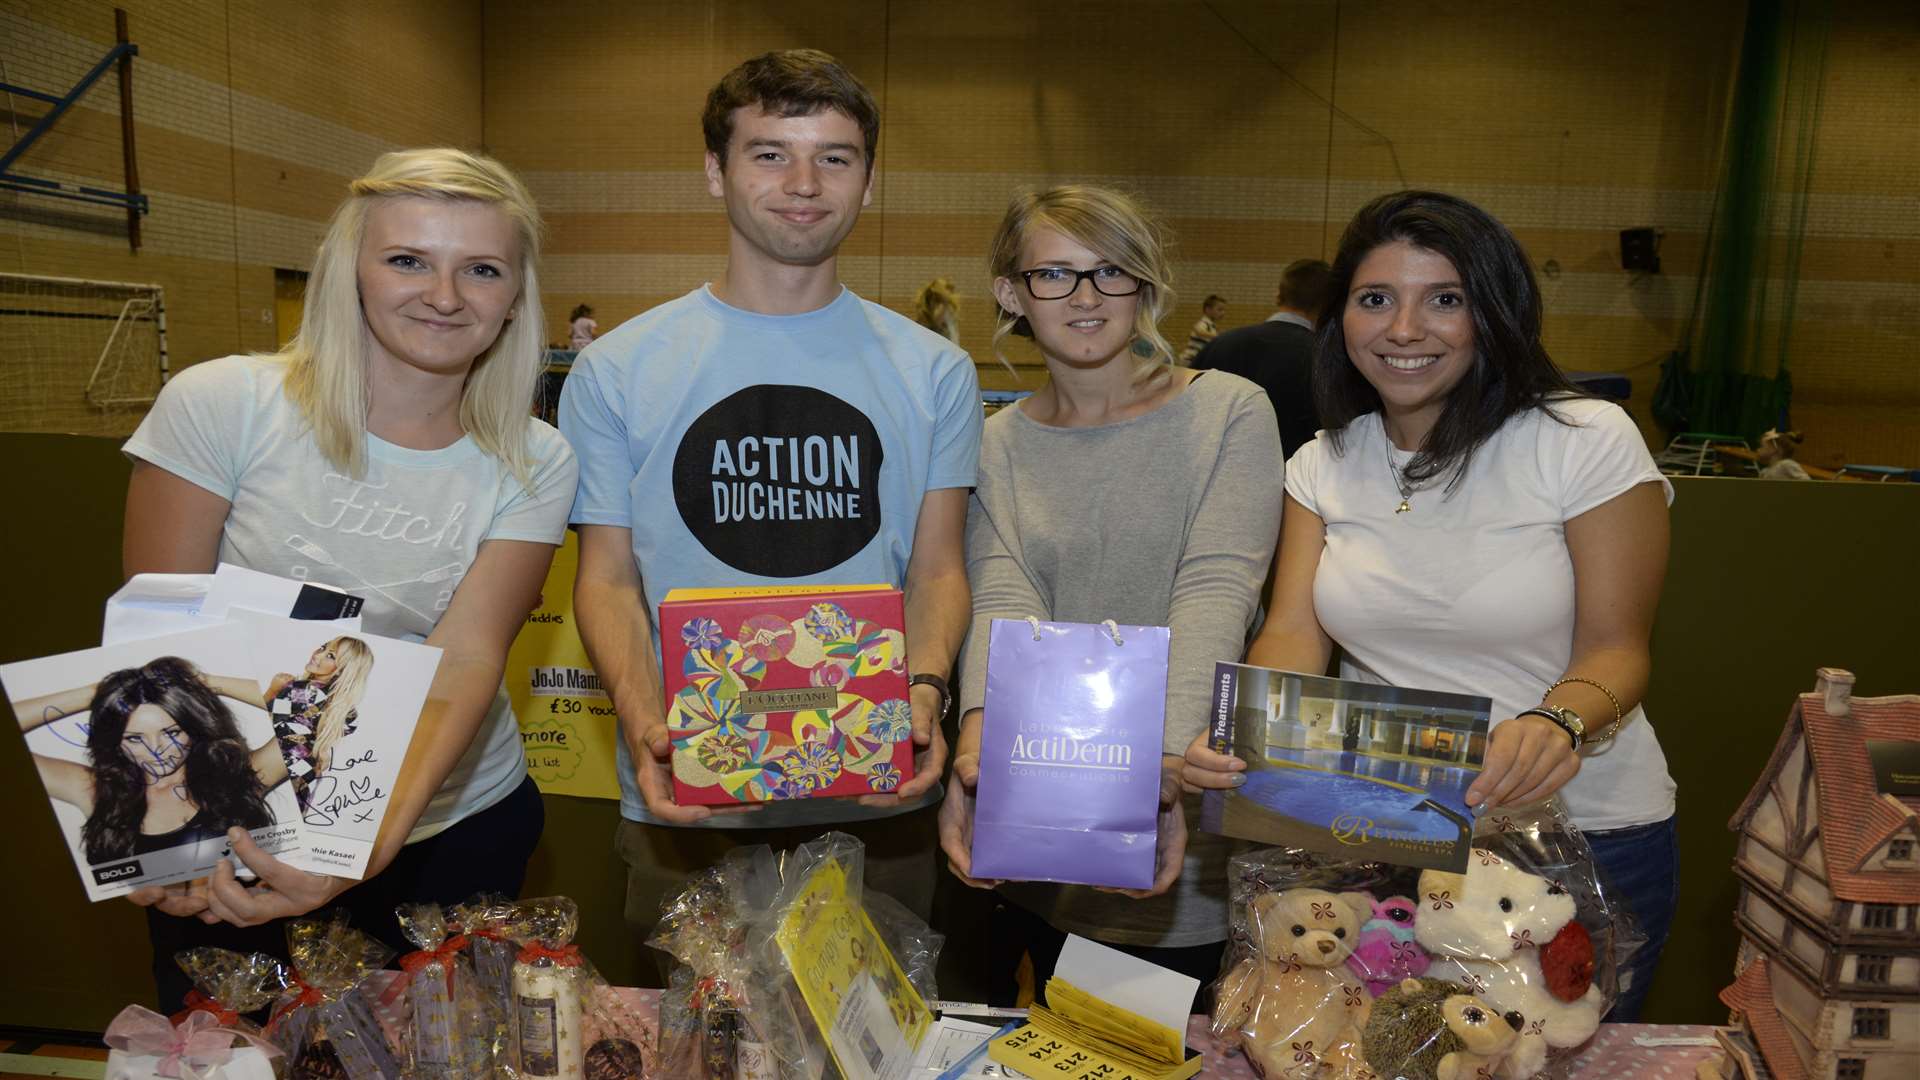 Natalie Demian, Paul Brown from Action Duchenne, Emma Gardiner and Fabiola Boccuti at one of the stalls